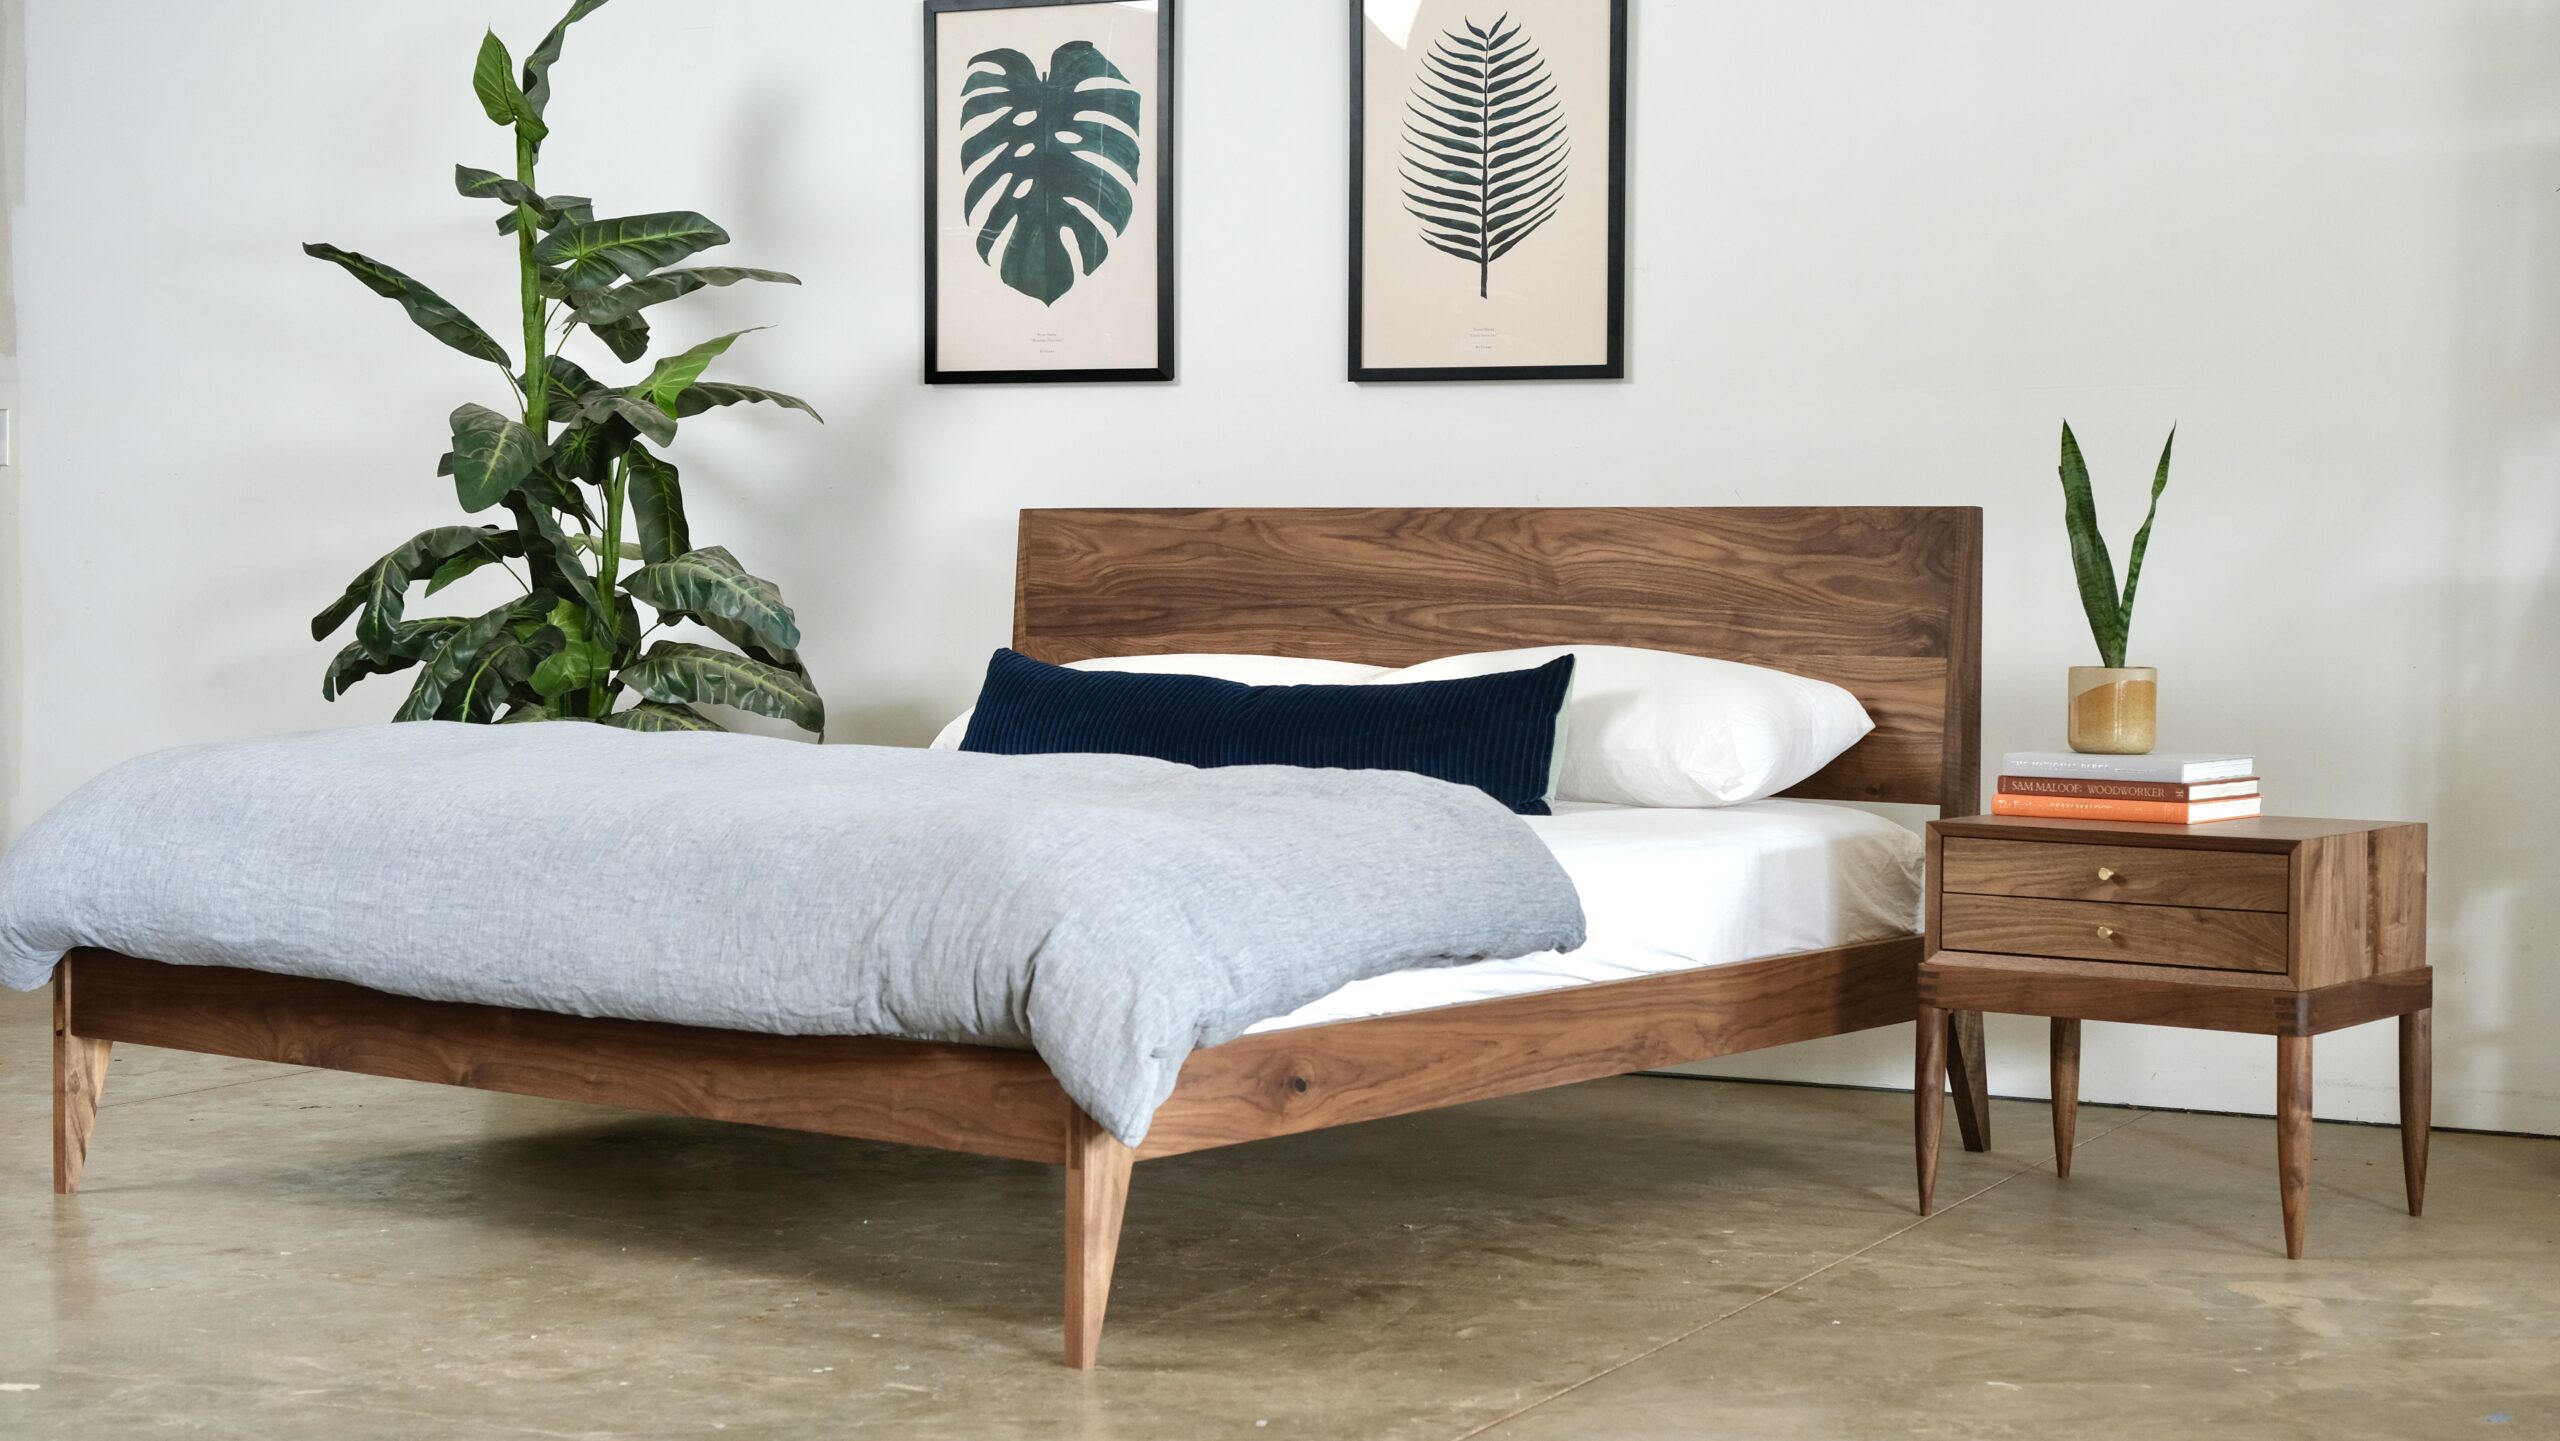 A solid wood bed next to a solid wood nightstand, both made of walnut, with books and a plant on top of the nightstand. Pictures are on the wall and a bigger plant on the other side of the bed.